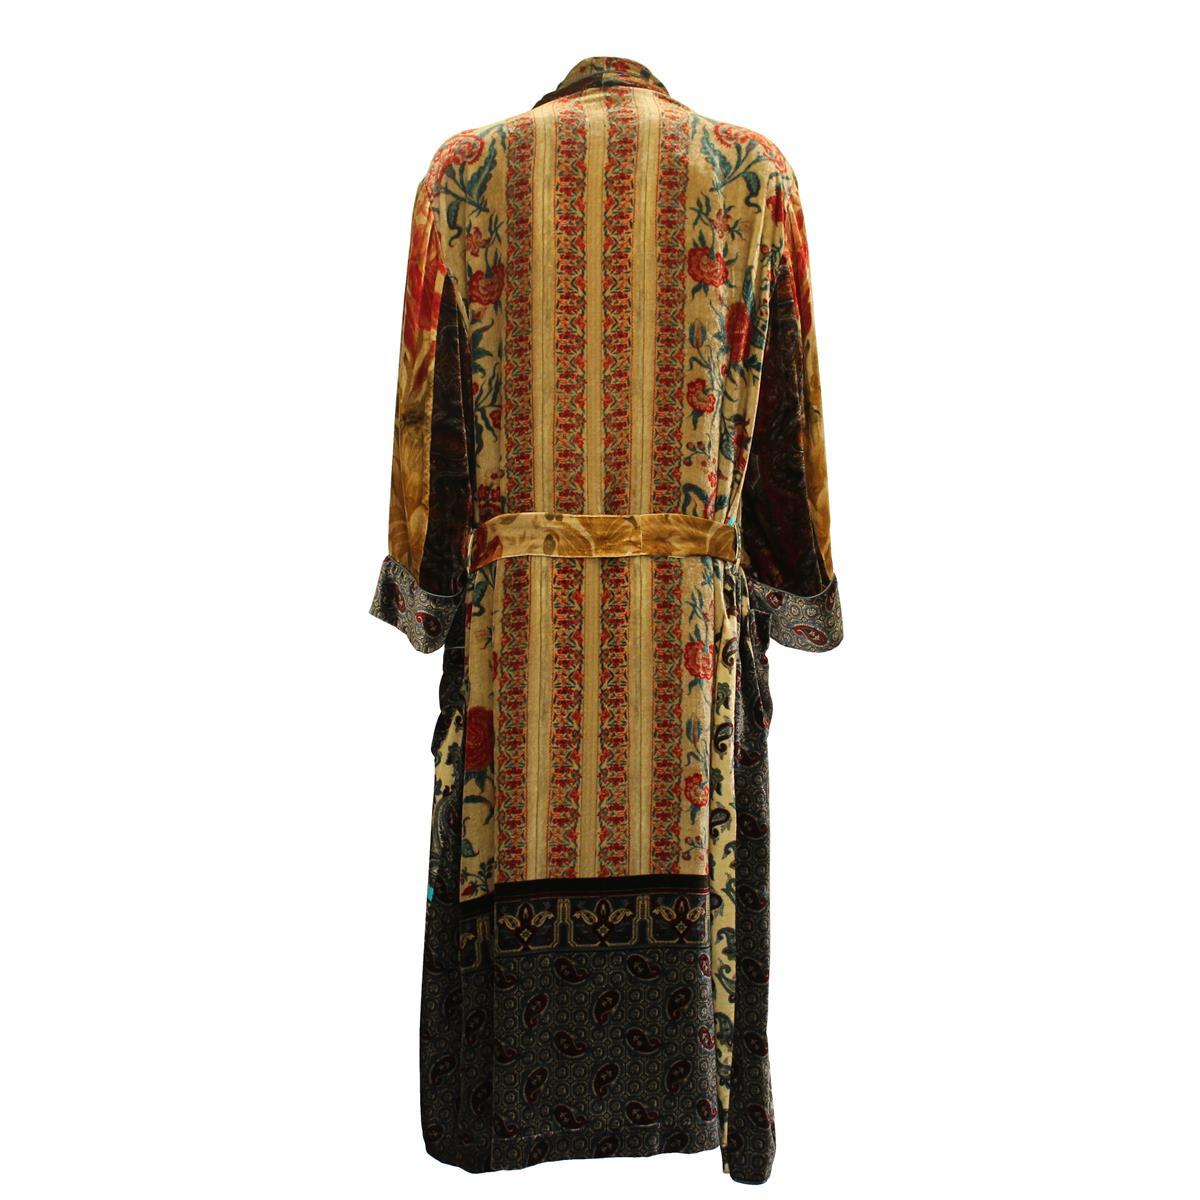 Wonderful overcoat !
Viscose and silk (18%)
Fancy pattern
Multicolored
With belt
Two pockets
Total length from shoulder cm 110 (43.3 inches)
Worldwide express shipping included in the price !